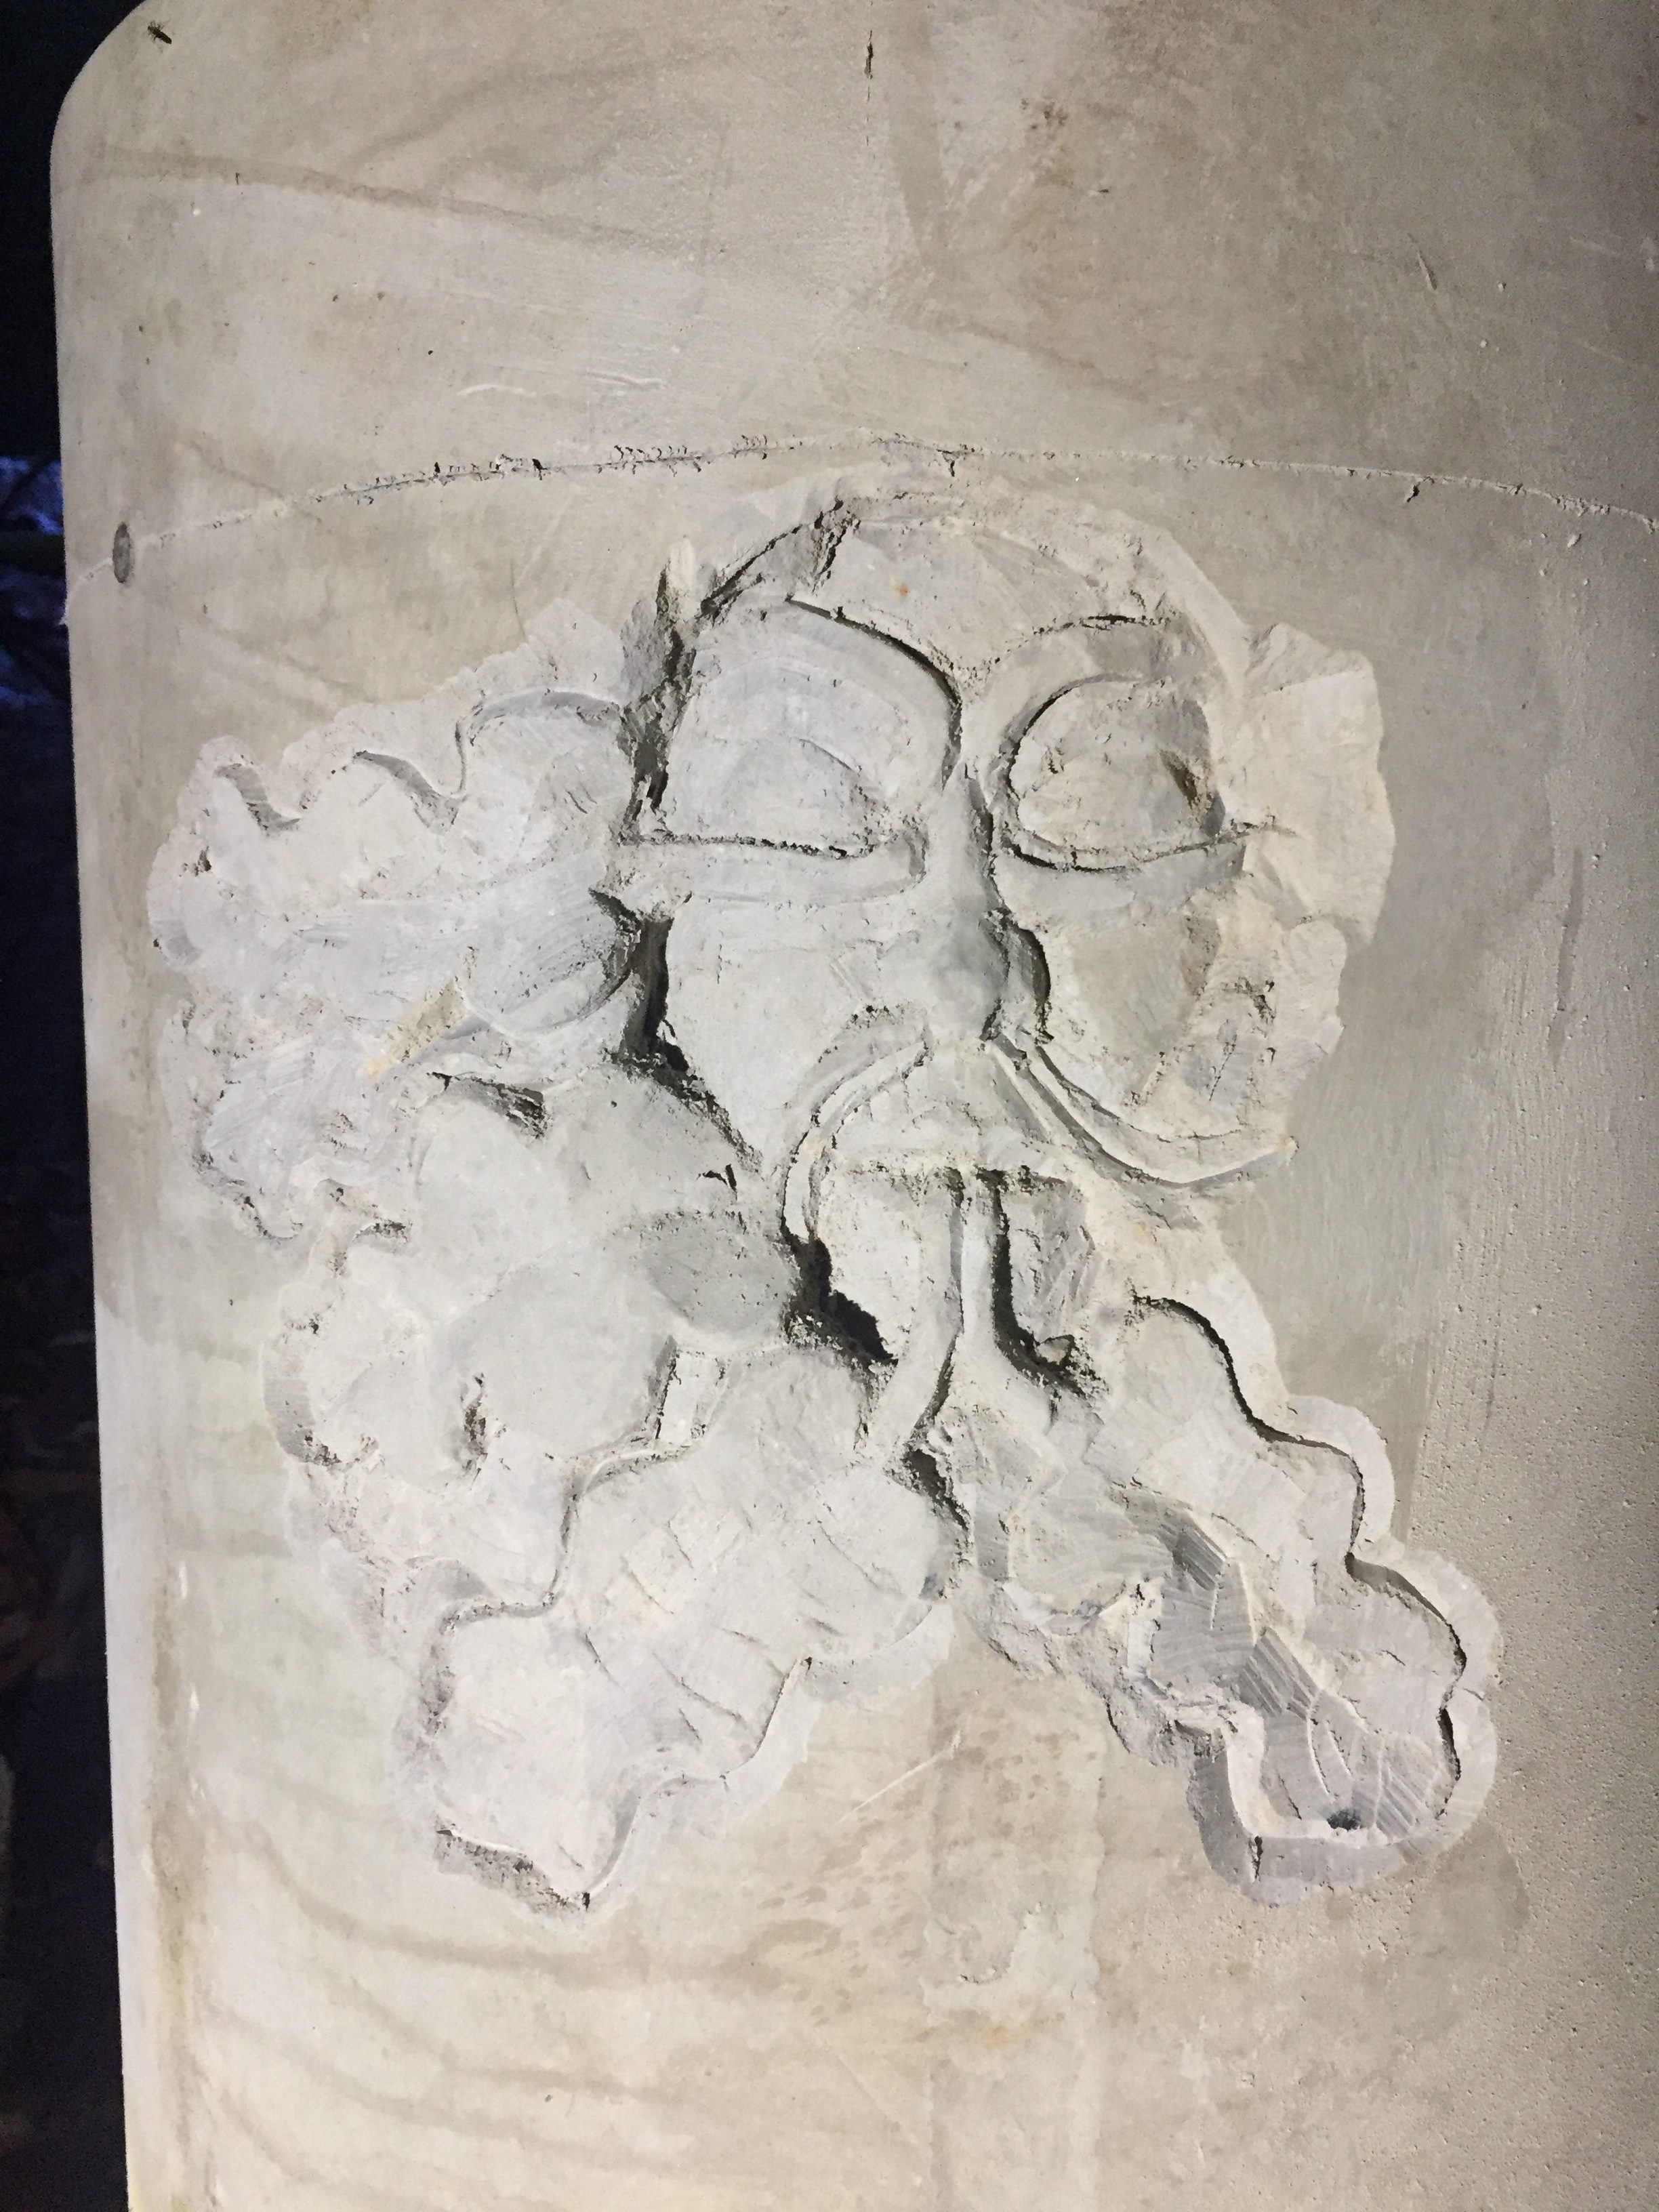 Stone carving work in progress